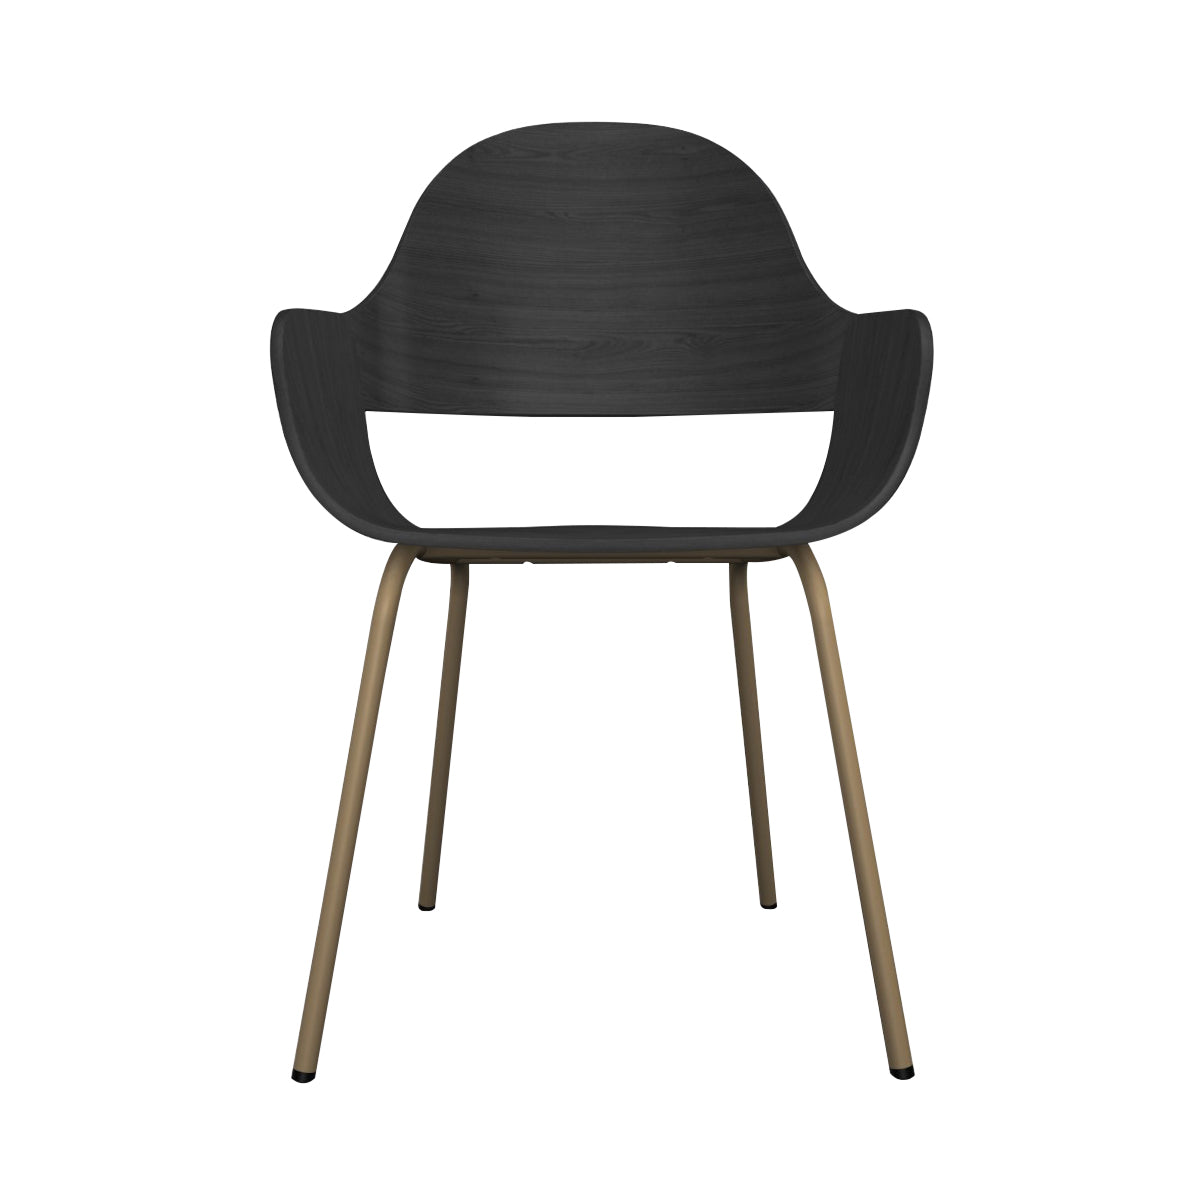 Showtime Nude Chair with Metal Legs: Ash Stained Black + Beige